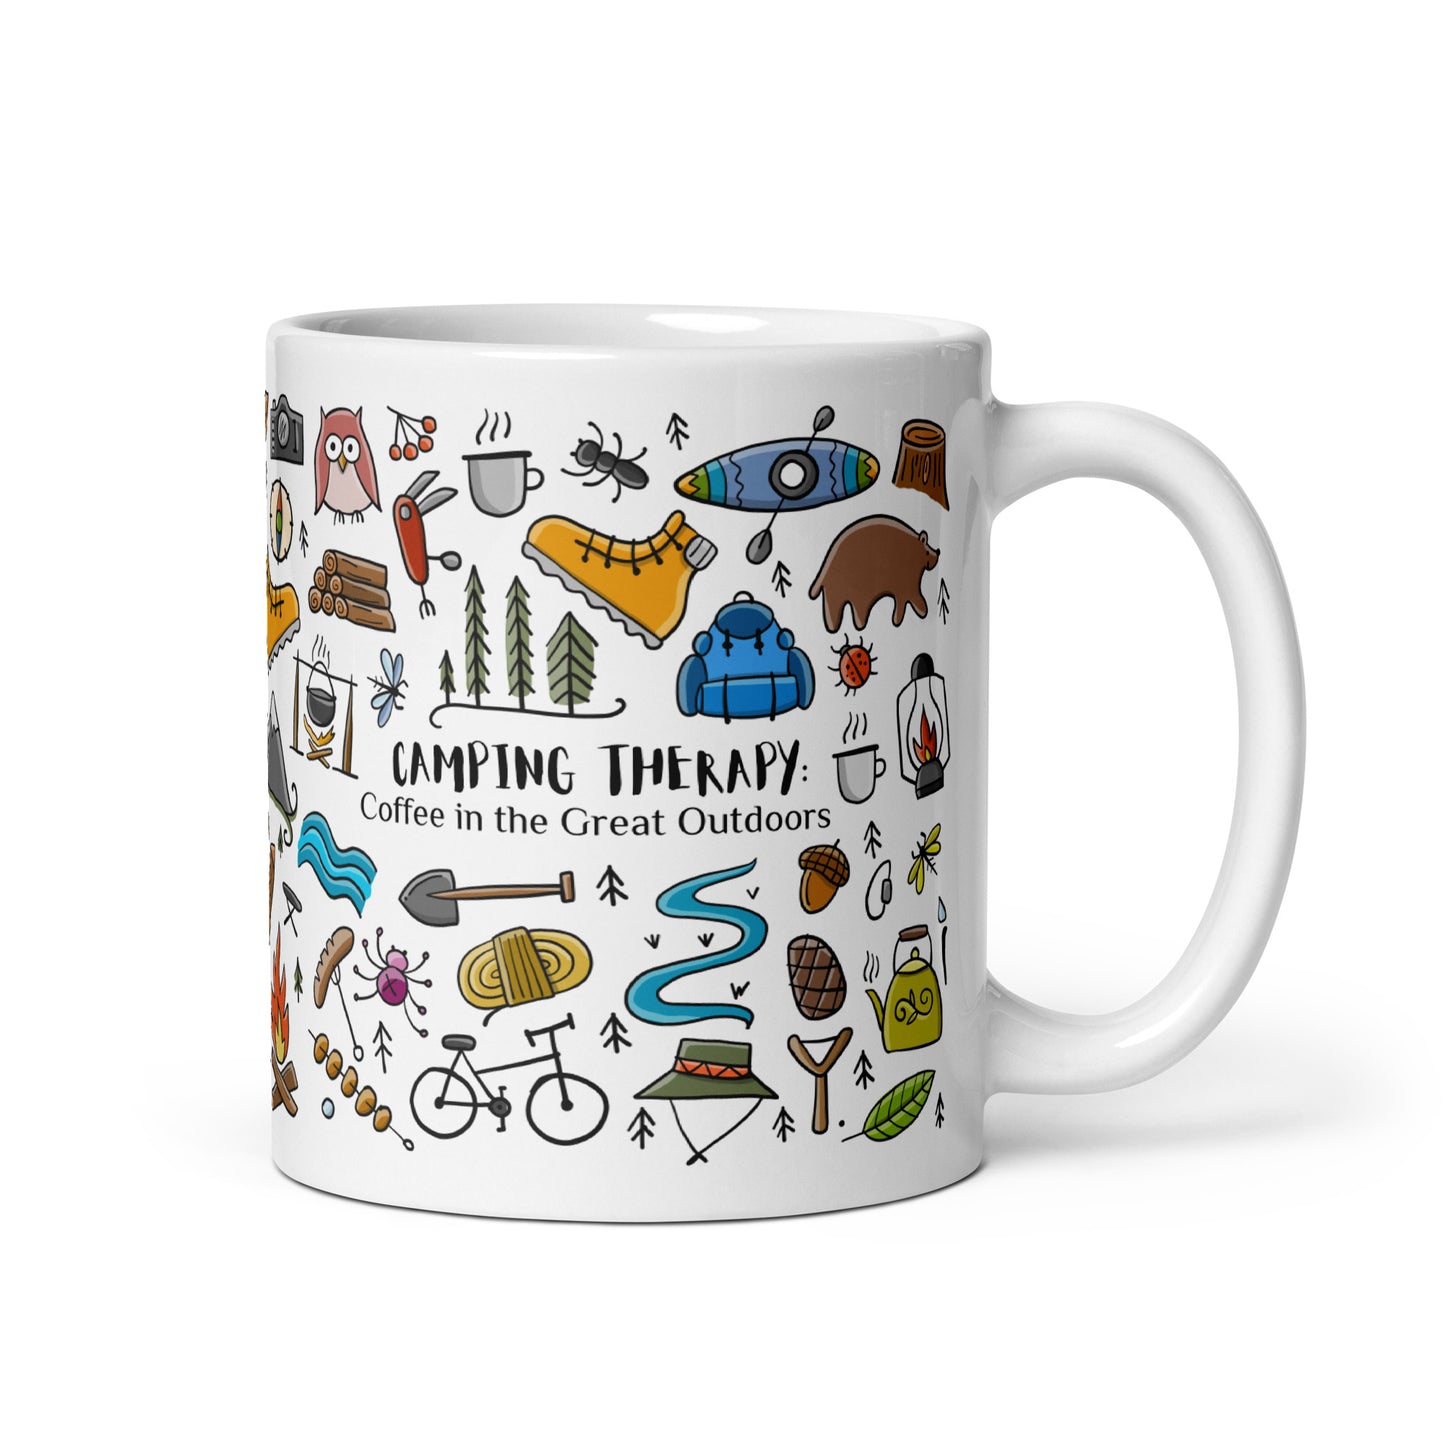 11 oz gift ceramic mug for camping and nature lovers. Basic text on mug: Camping therapy. Coffee in the Great Outdoors. The main text on the mug can be replaced for your own.